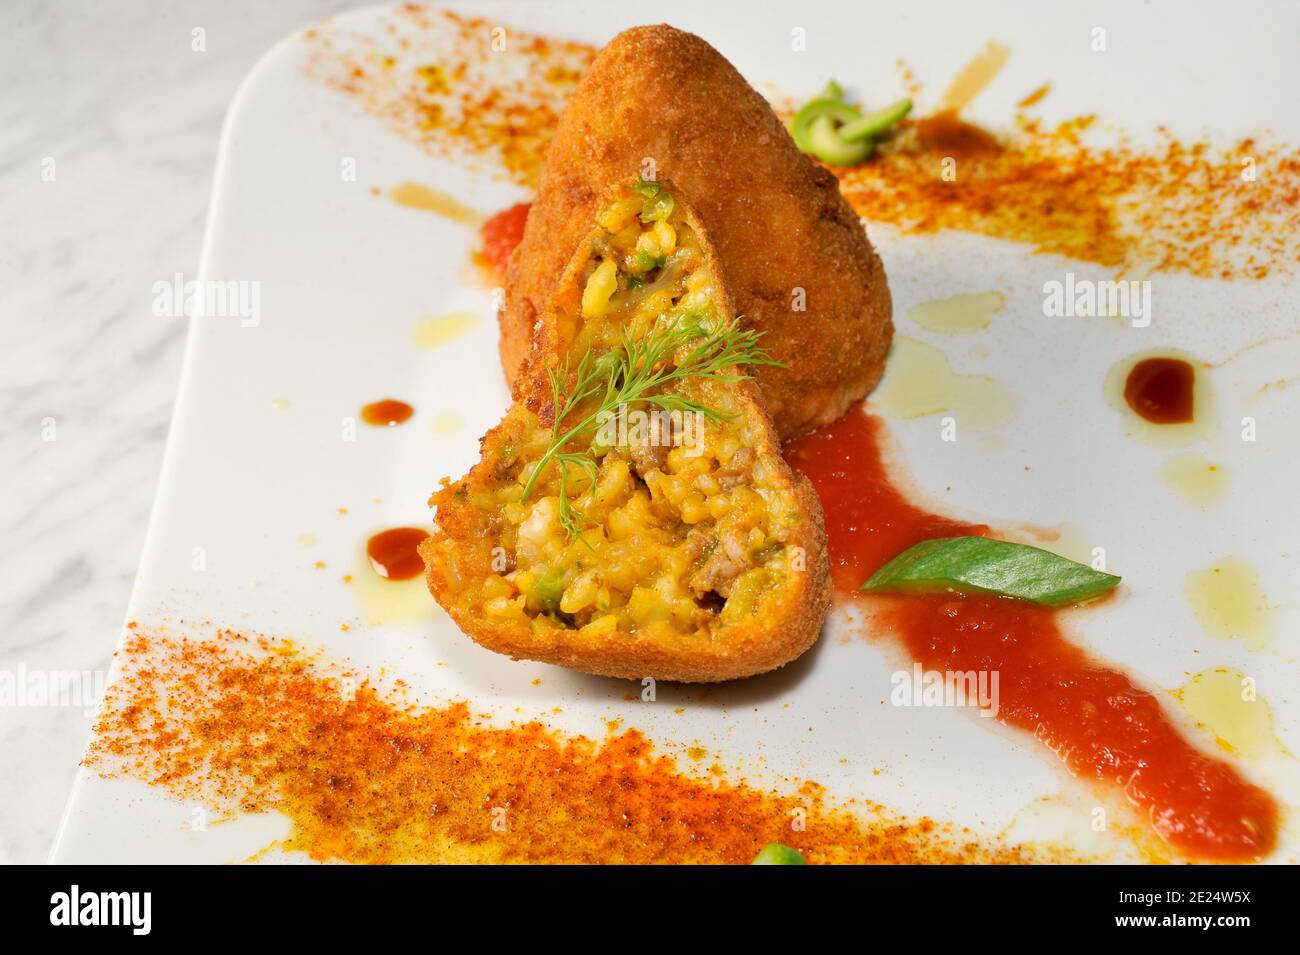 Rice arancini, traditional Sicilian meatballs, Italy, with rice, meat, peas and sauce, breaded and fried. one whole and one cut in half Stock Photo